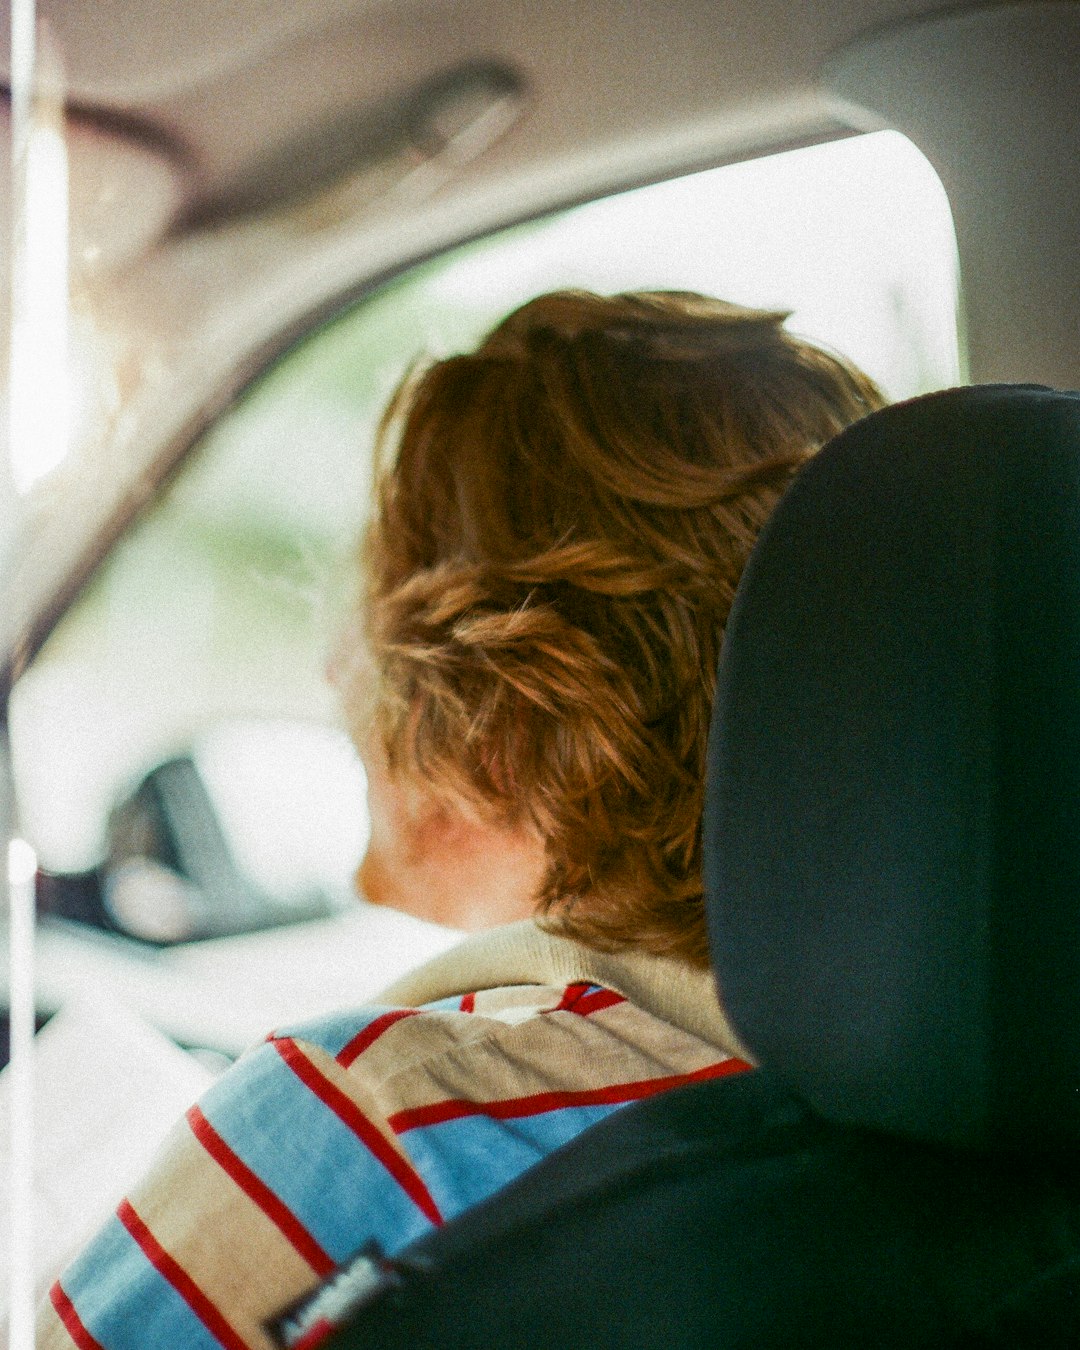 person with blonde hair beside driver's seat